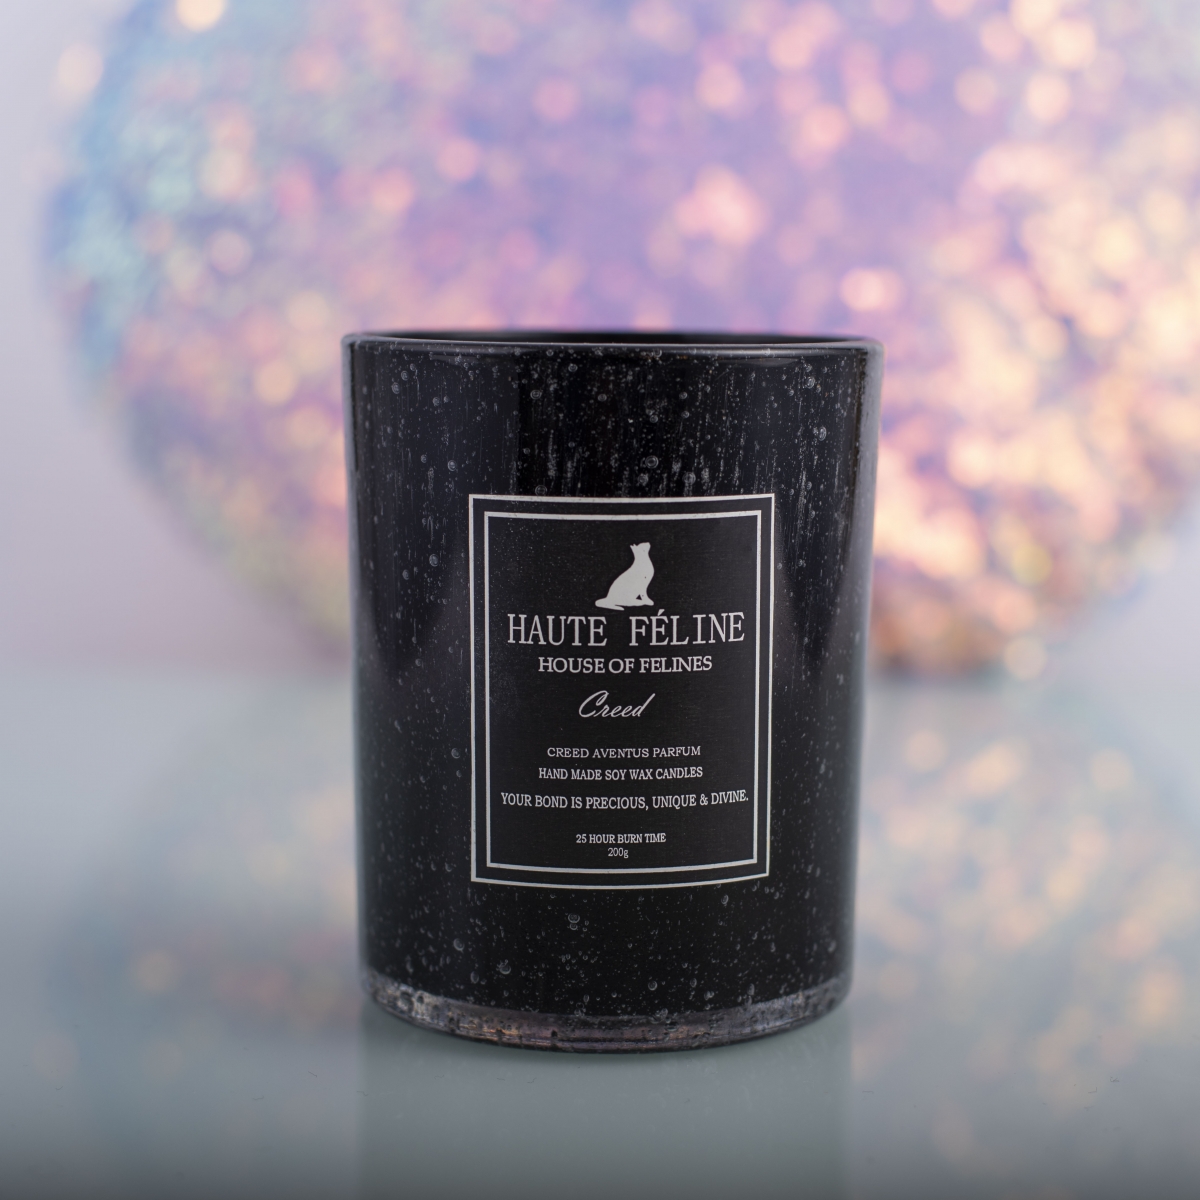 Soy Candles : Creed Aventus Candles , Black Candles ,Bubble Glass Jar, Perfume Candles ,China Factory , Wholesale Price-HOWCANDLE-Candles,Scented Candles,Aromatherapy Candles,Soy Candles,Vegan Candles,Jar Candles,Pillar Candles,Candle Gift Sets,Essential Oils,Reed Diffuser,Candle Holder,